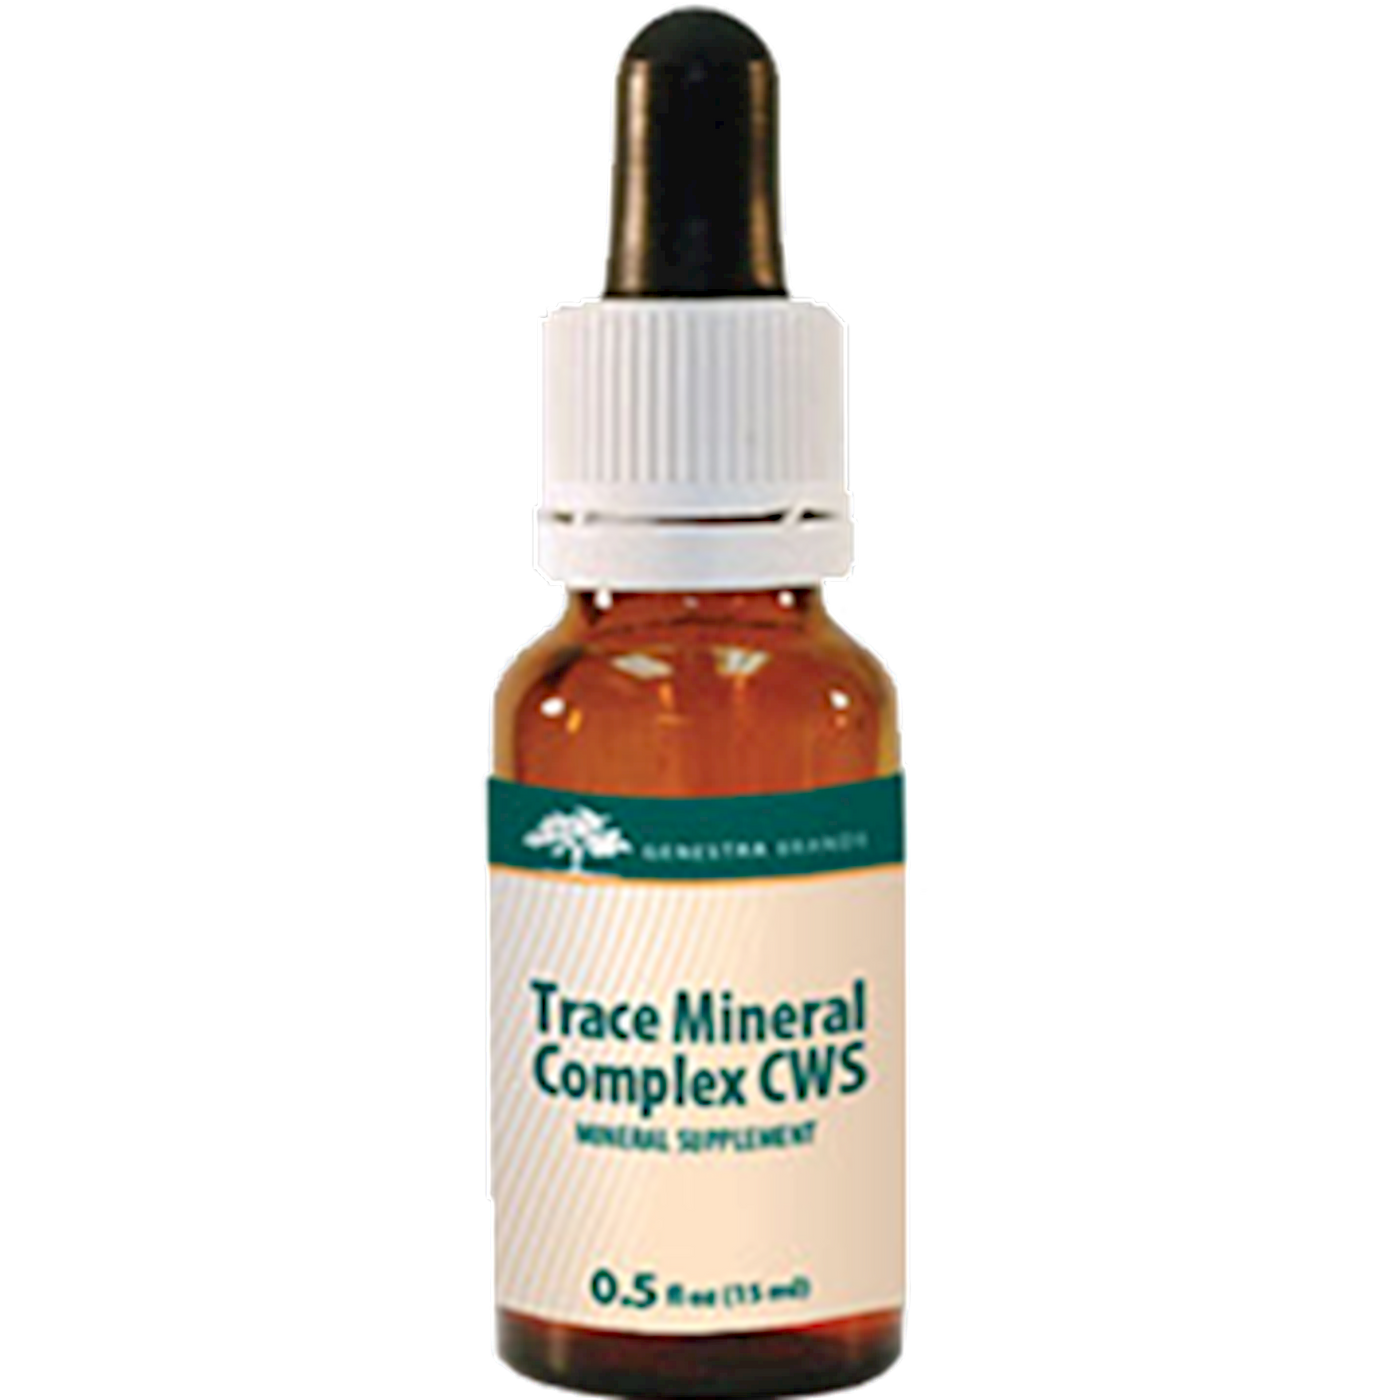 Trace Mineral Complex CWS .5 fl oz Curated Wellness